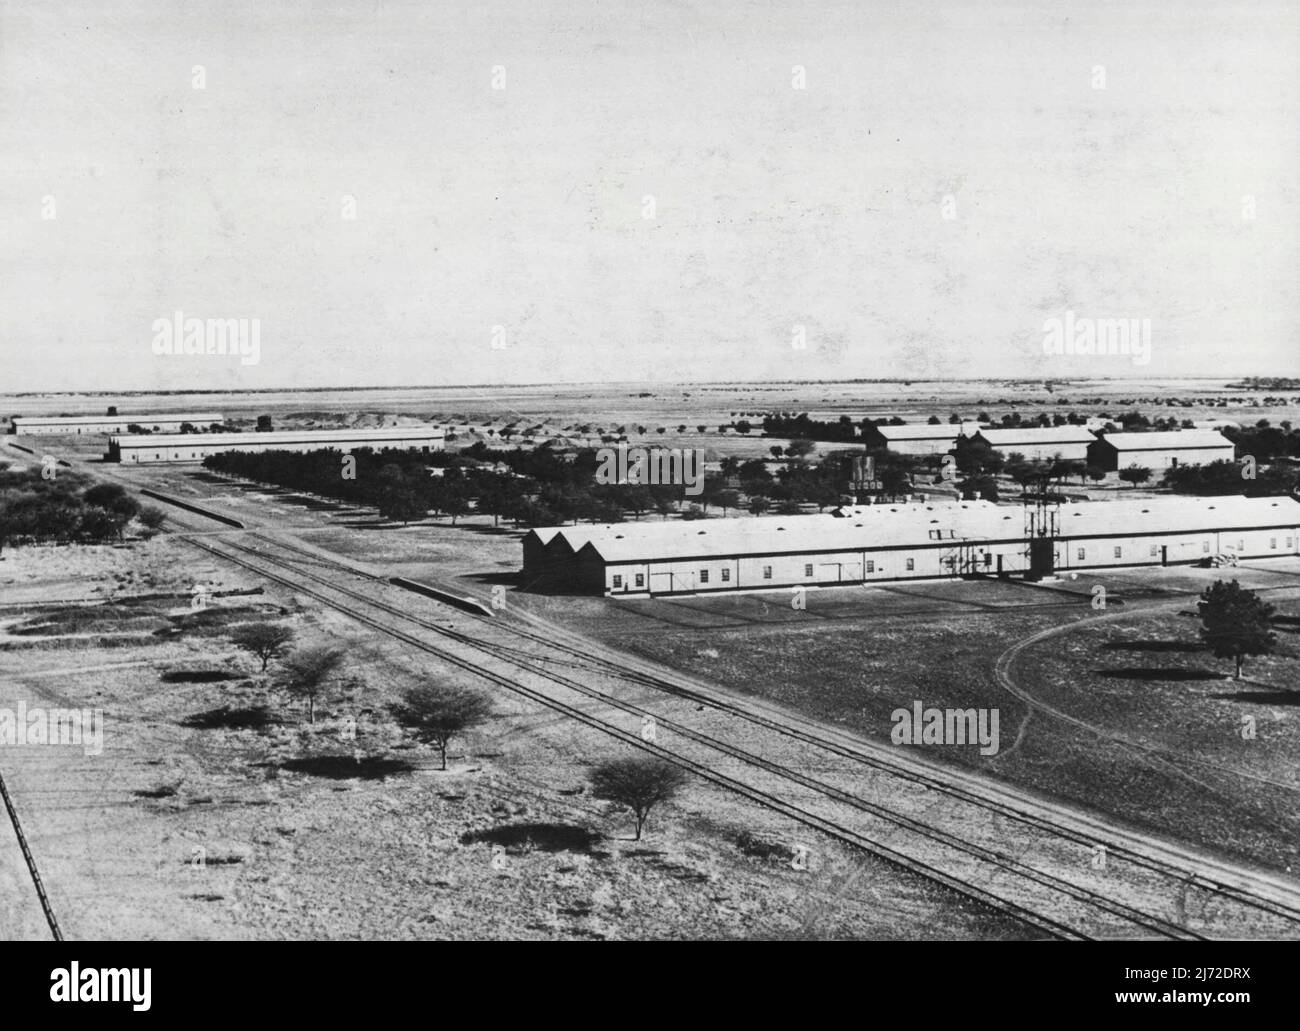 New Deal On The Nile. The Gezira Cotton Scheme -- Headquarters of Sudan Cotton Syndicate with three large ginning factories and other buildings covers wide area near Wad Madani. In foreground is a line of Sudan Government Railways which takes cotton to Port Sudan for export. The British Government in Africa has long had its own 'Tennessee Valley' scheme the Gezira Cotton Scheme in the Valley area of nearly a million acres between the Blue and White Niles. Plans for the area's development were begun before the last war, and by 1925 the Sennar Dam, two miles long and over a hundred foot high at Stock Photo